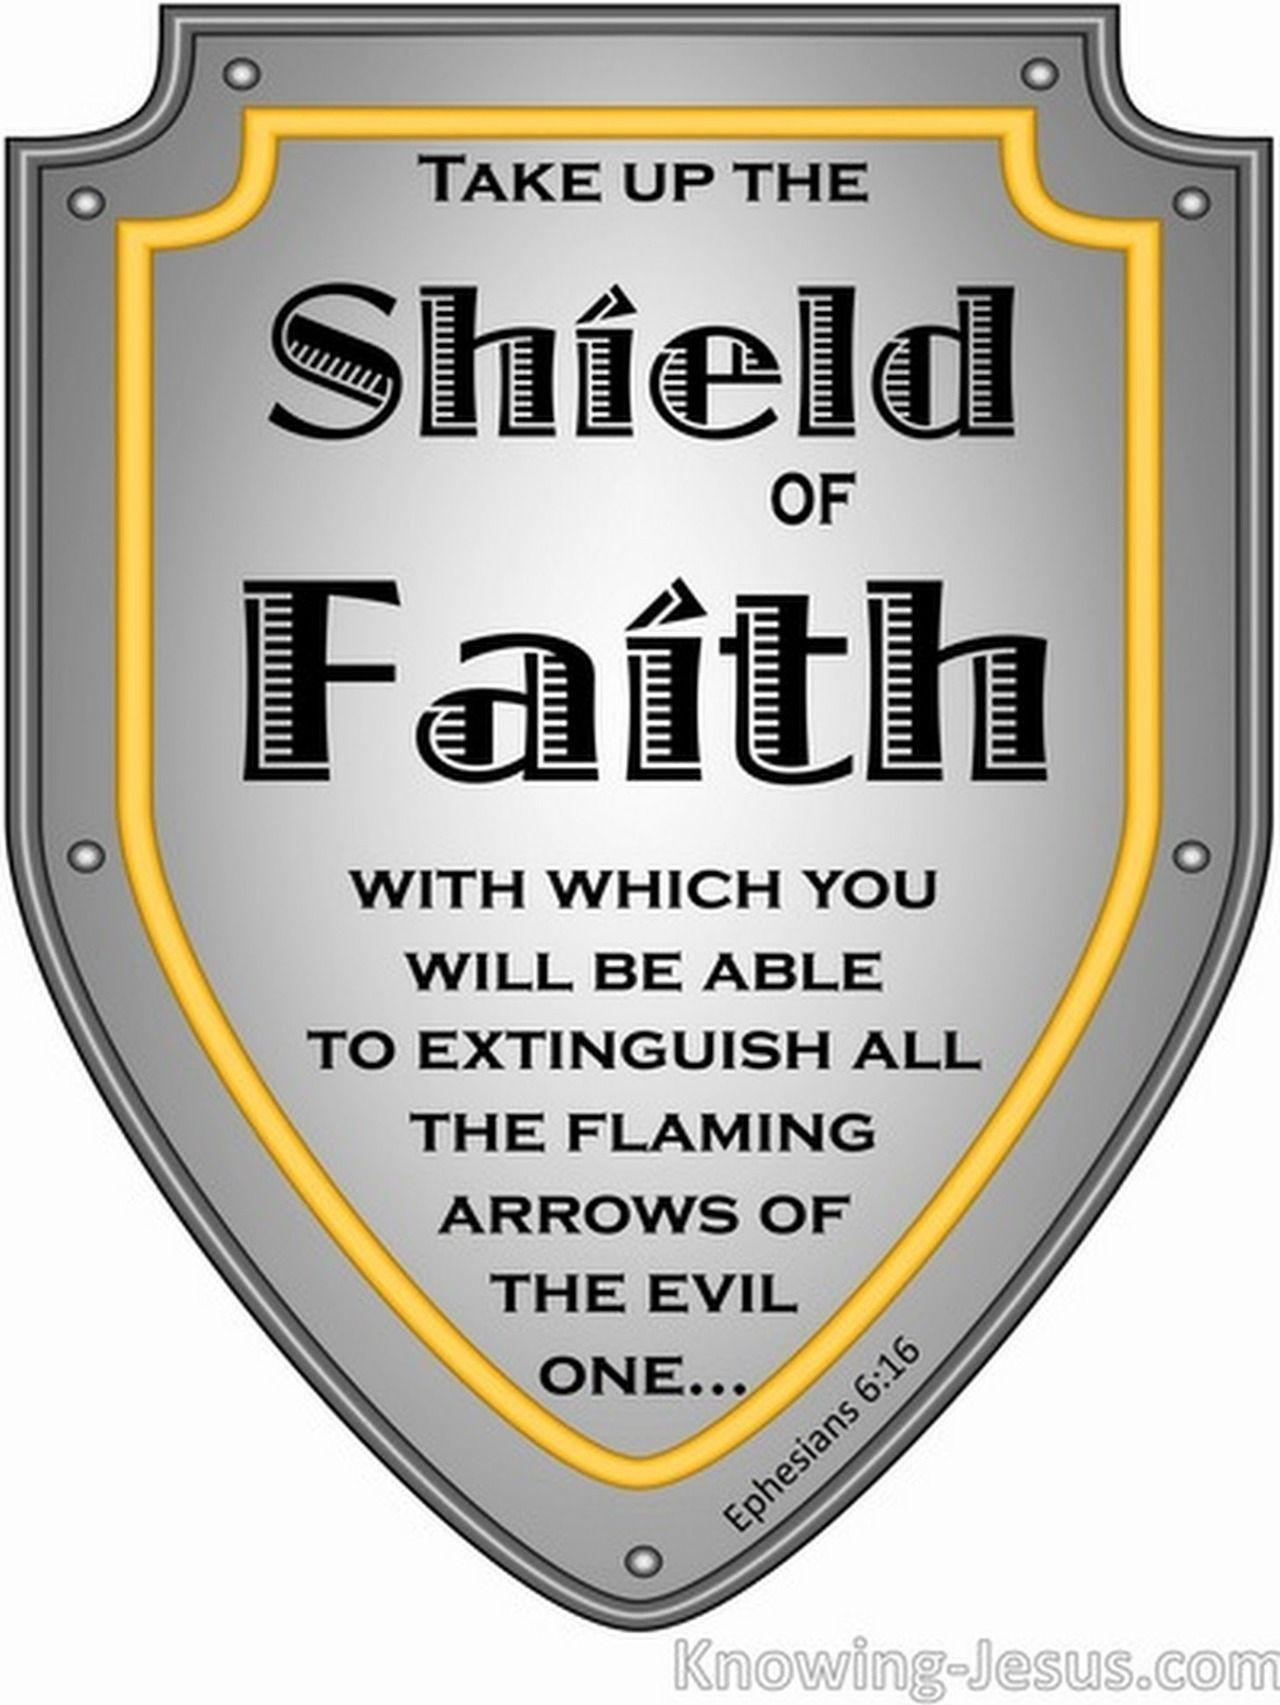 Shield of Faith Logo - Ephesians 6:16 (NASB) - in addition to all, taking up the shield of ...